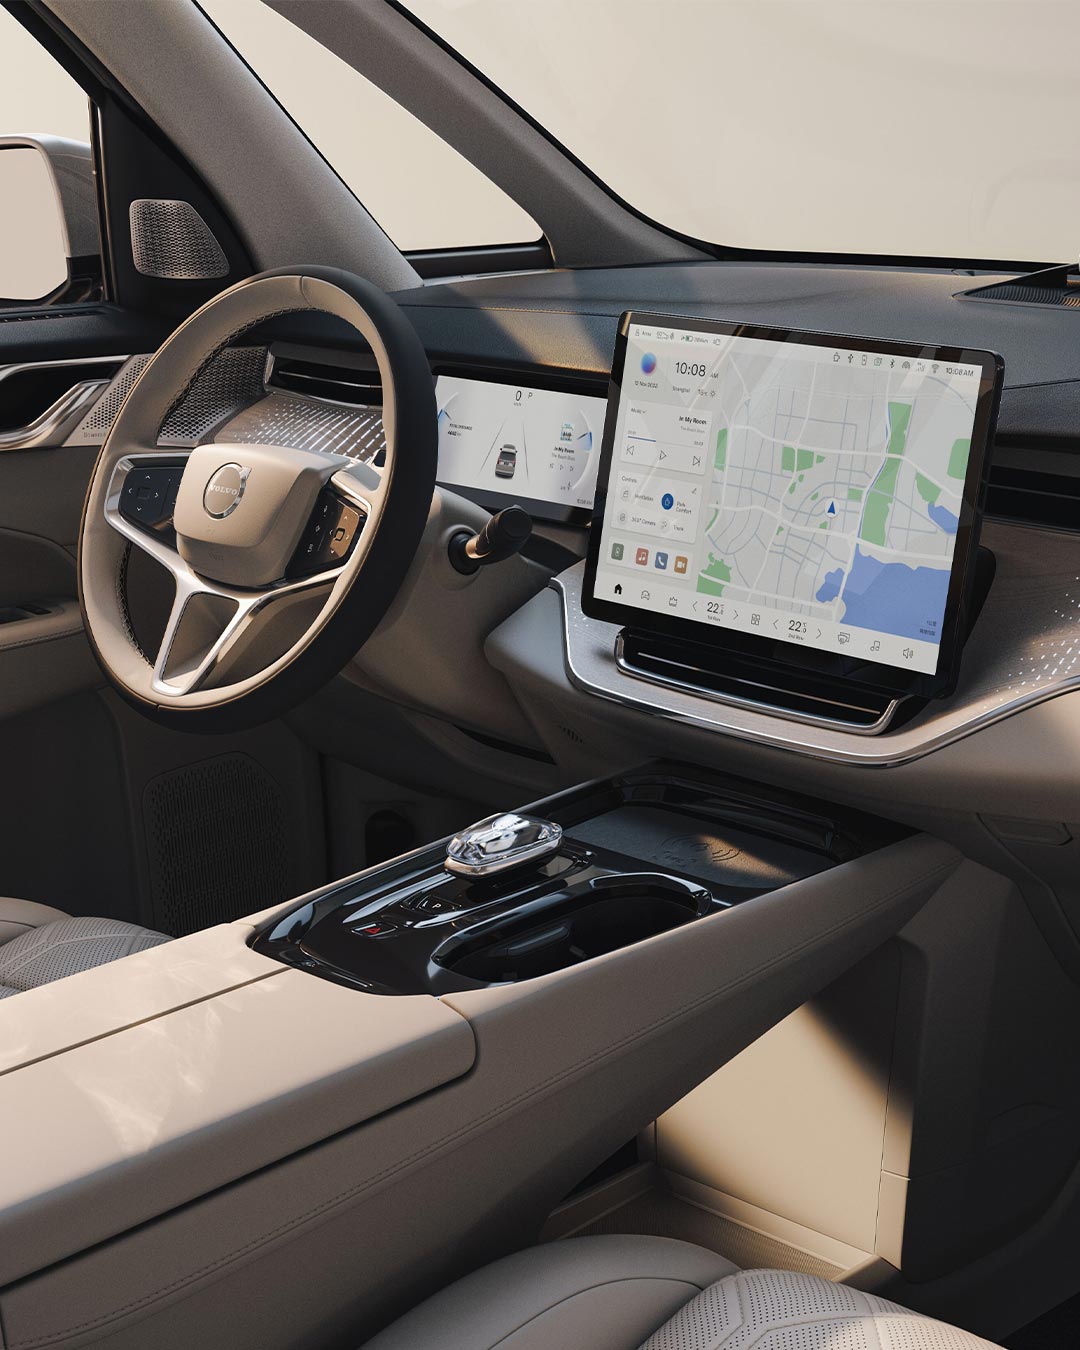 Image of the Orrefors crystal gear shift, wireless charger and storage featured in the fully electric EM90.